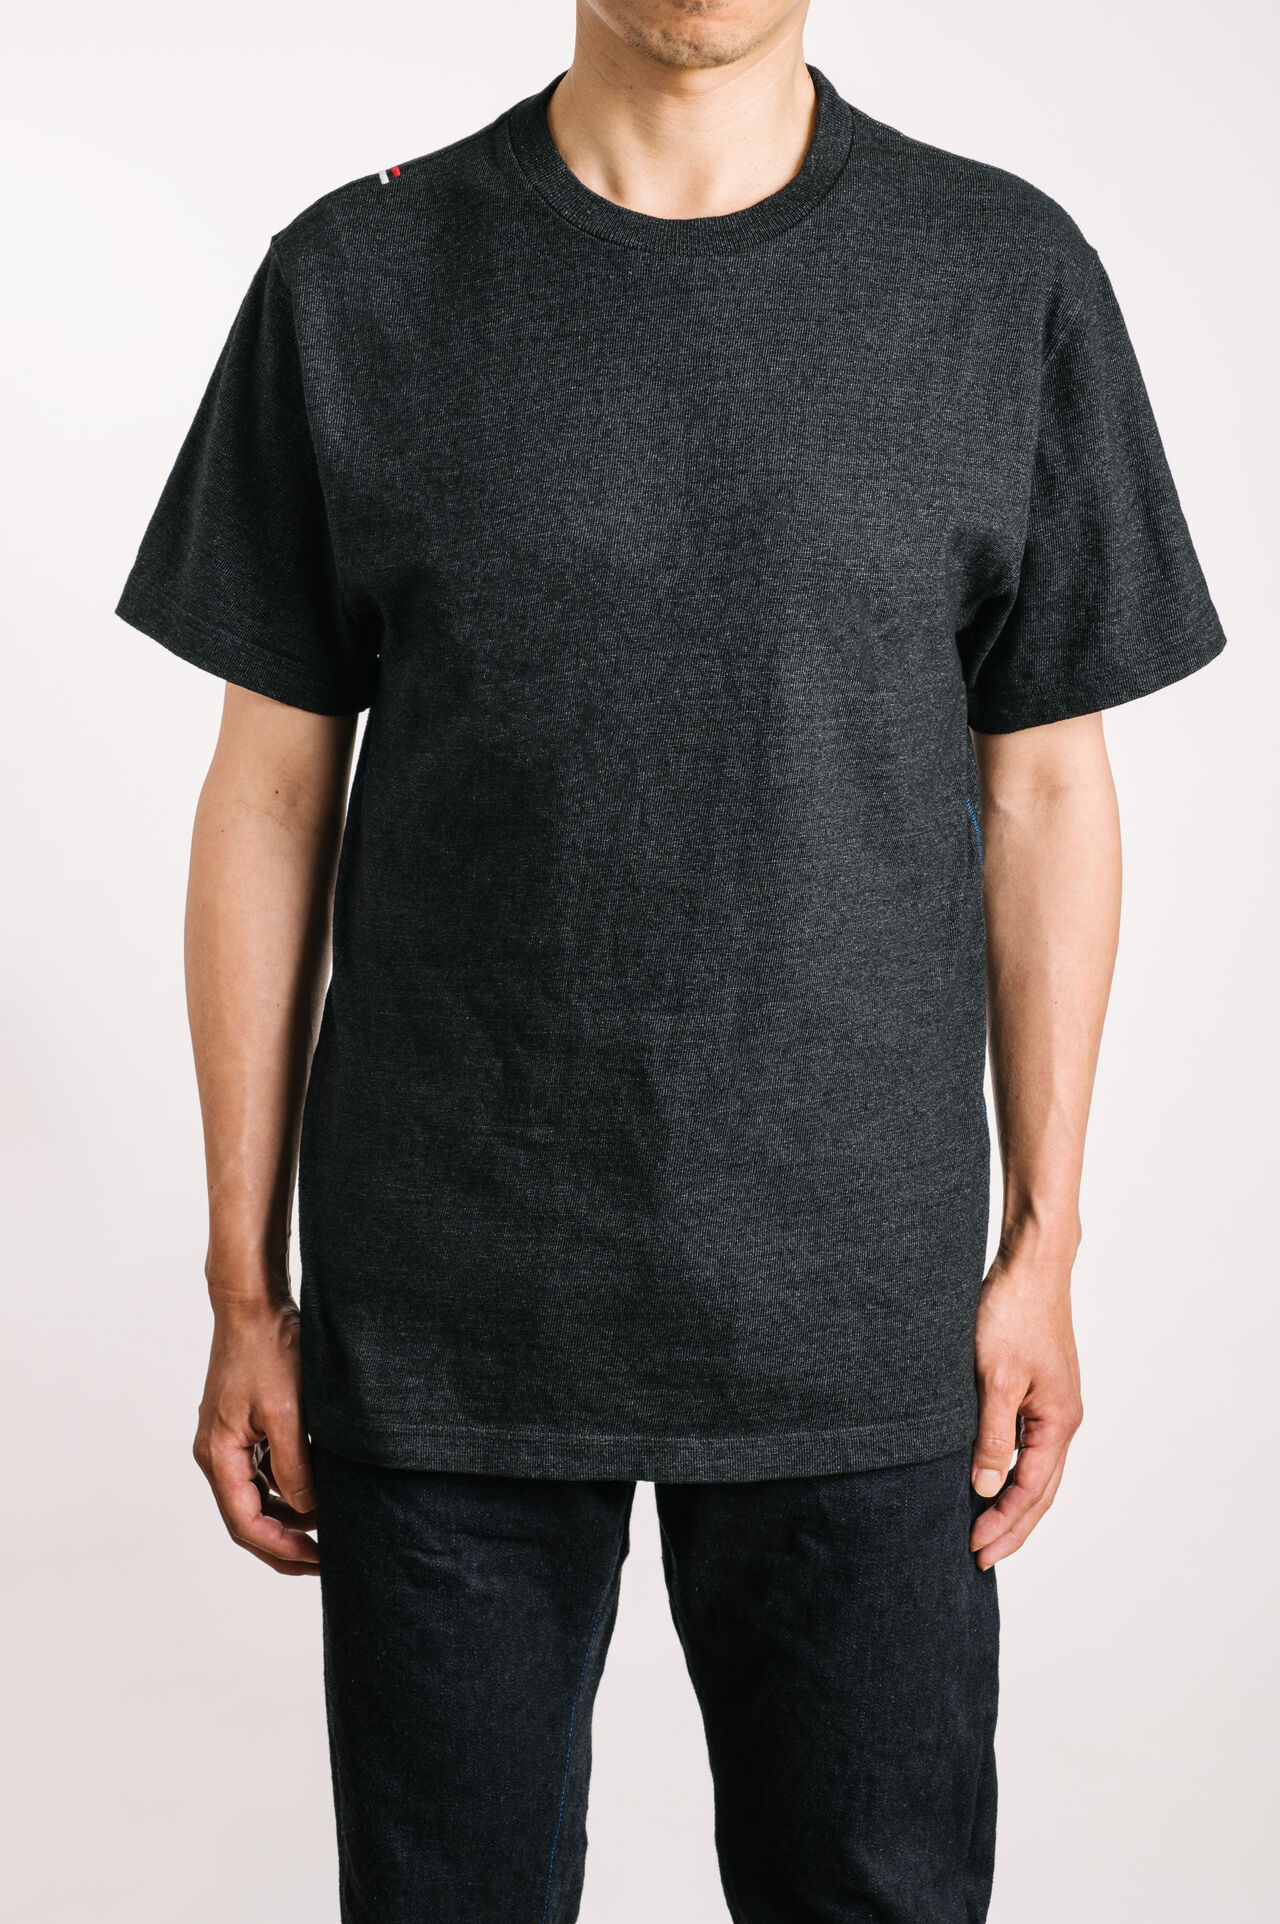 GY8714S HEAVY BLACK T-SHIRT (NATURAL SUMI INK DYE),, large image number 0